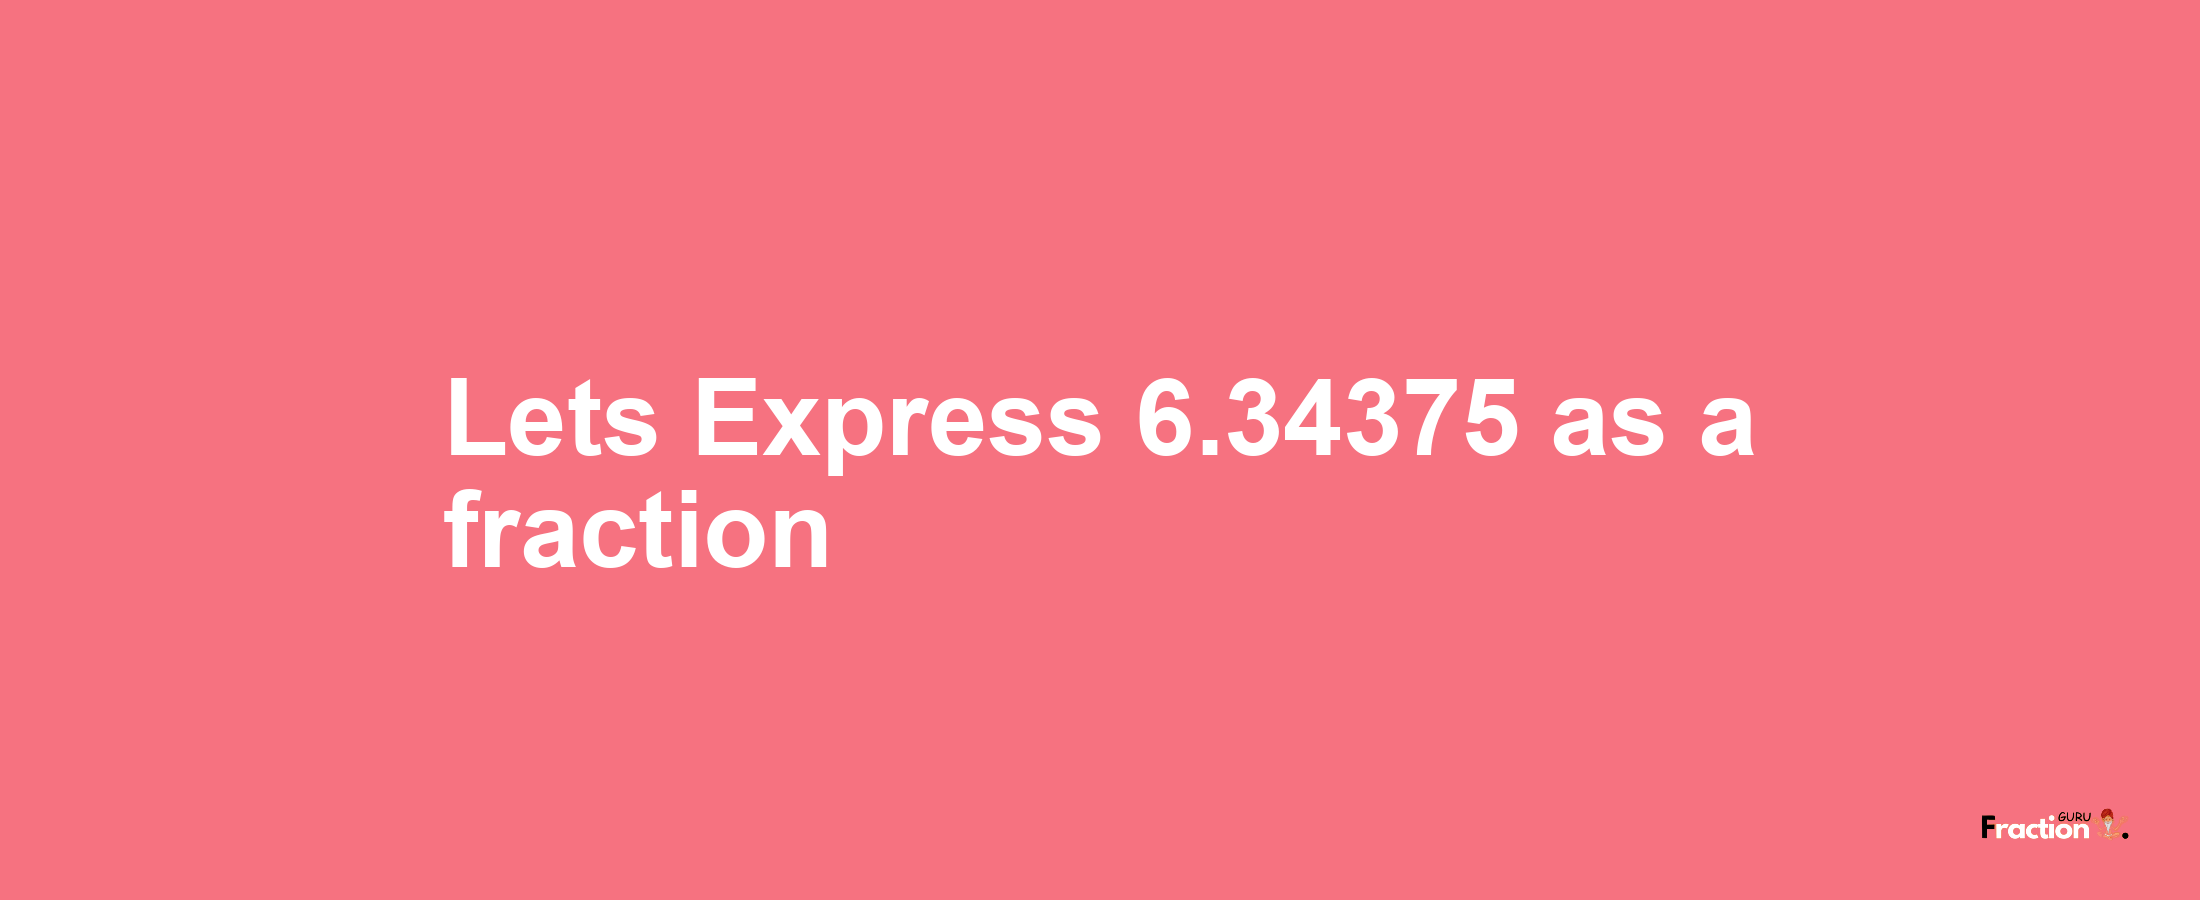 Lets Express 6.34375 as afraction